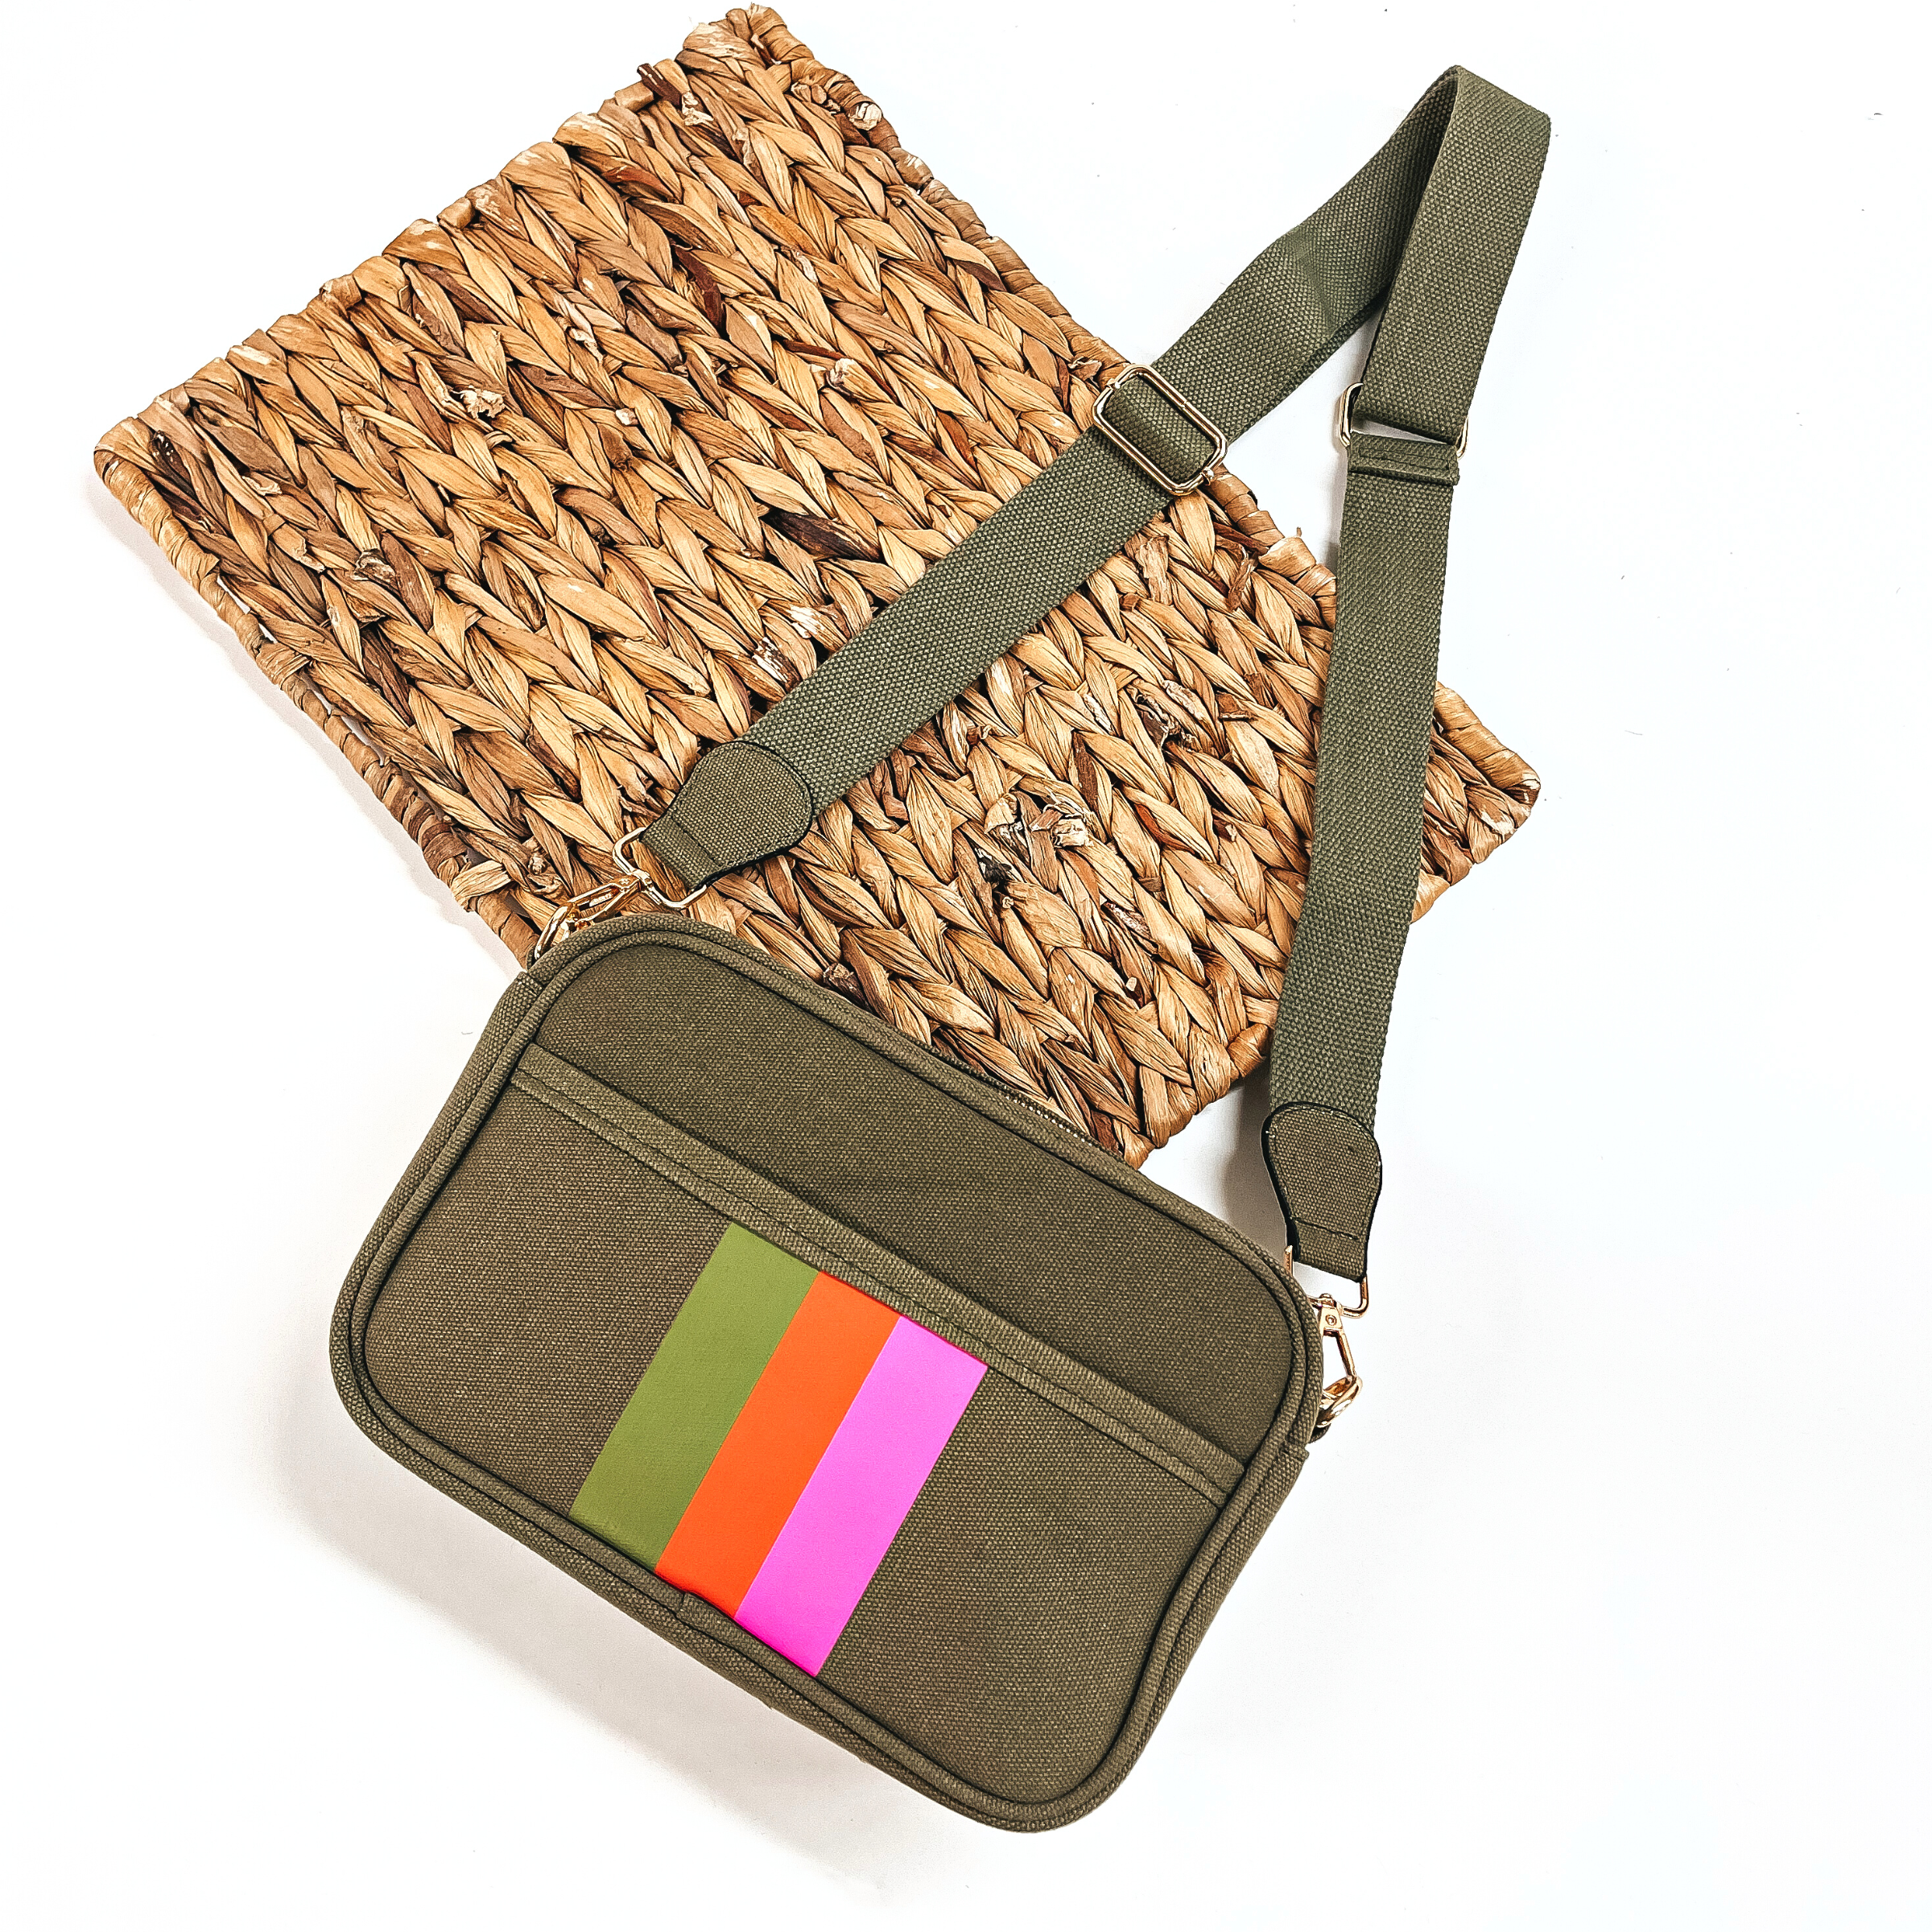 Special Treat Multicolored Striped Crossbody Bag in Olive Green - Giddy Up Glamour Boutique